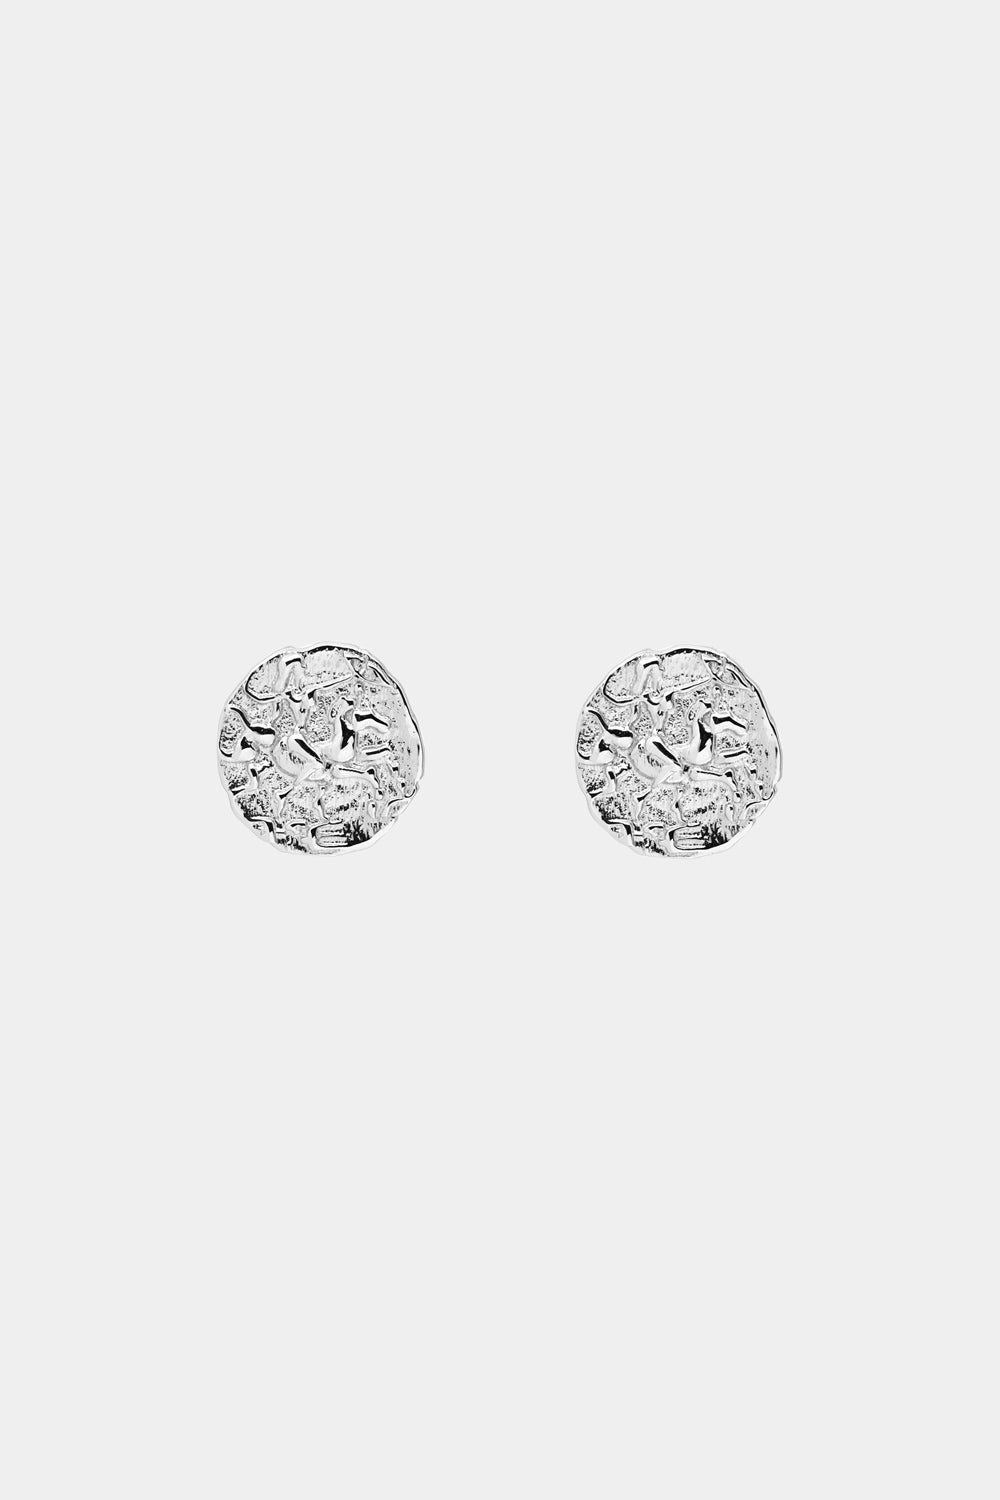 Coin Stud Earrings | Silver or 9K White Gold